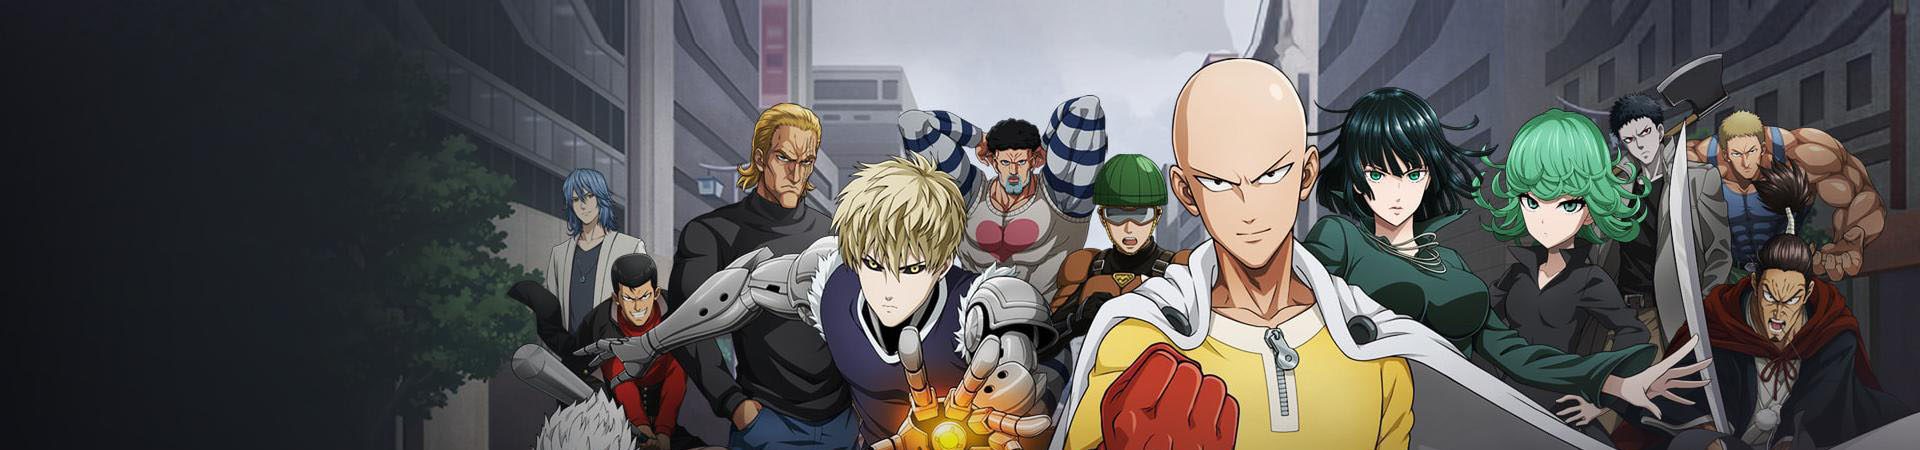 One Punch Man: Road to Hero 2.0 bannière